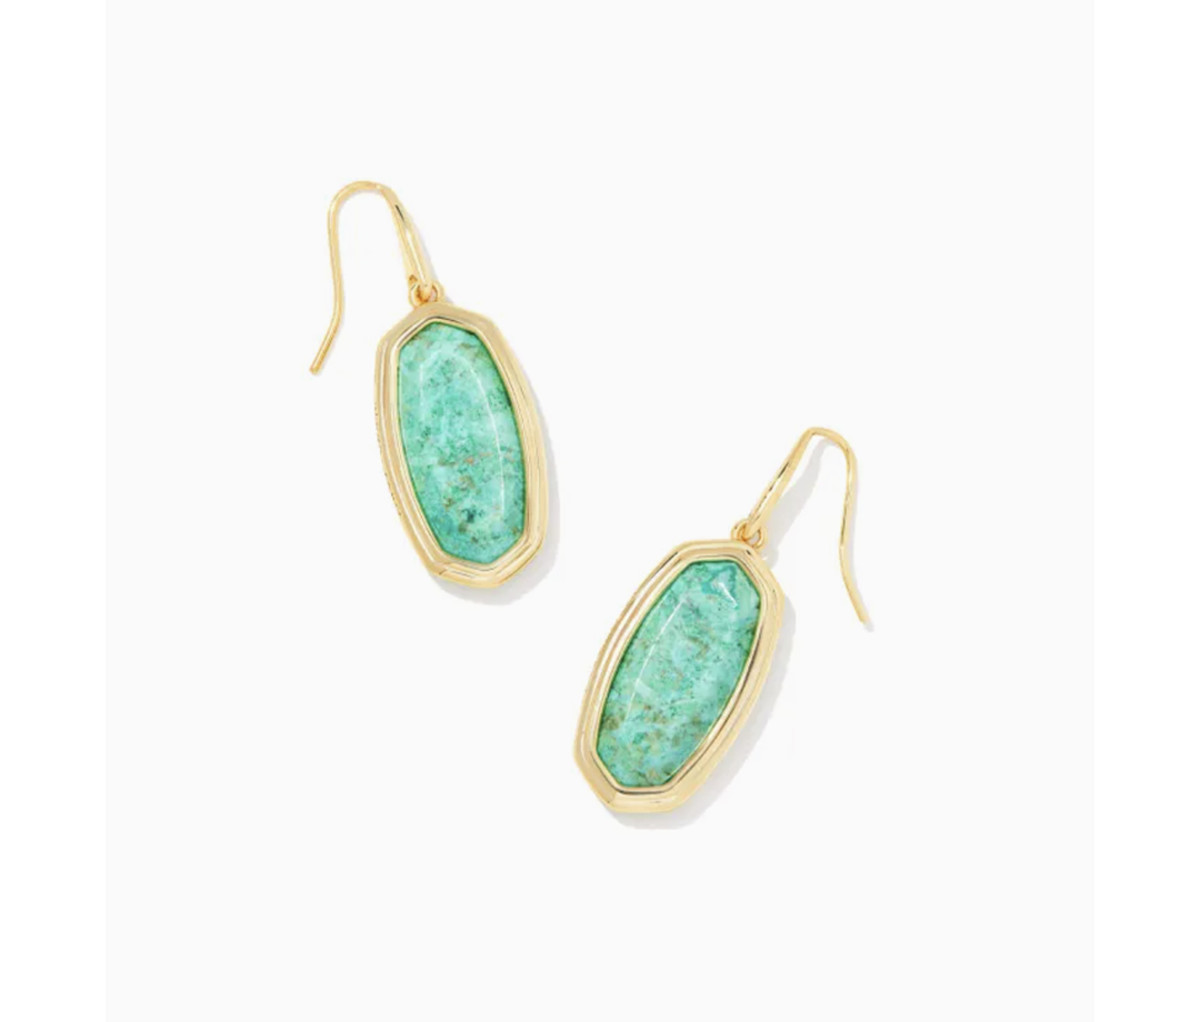 The Best Gifts For The Women in Your Life From Kendra Scott - Men's Journal